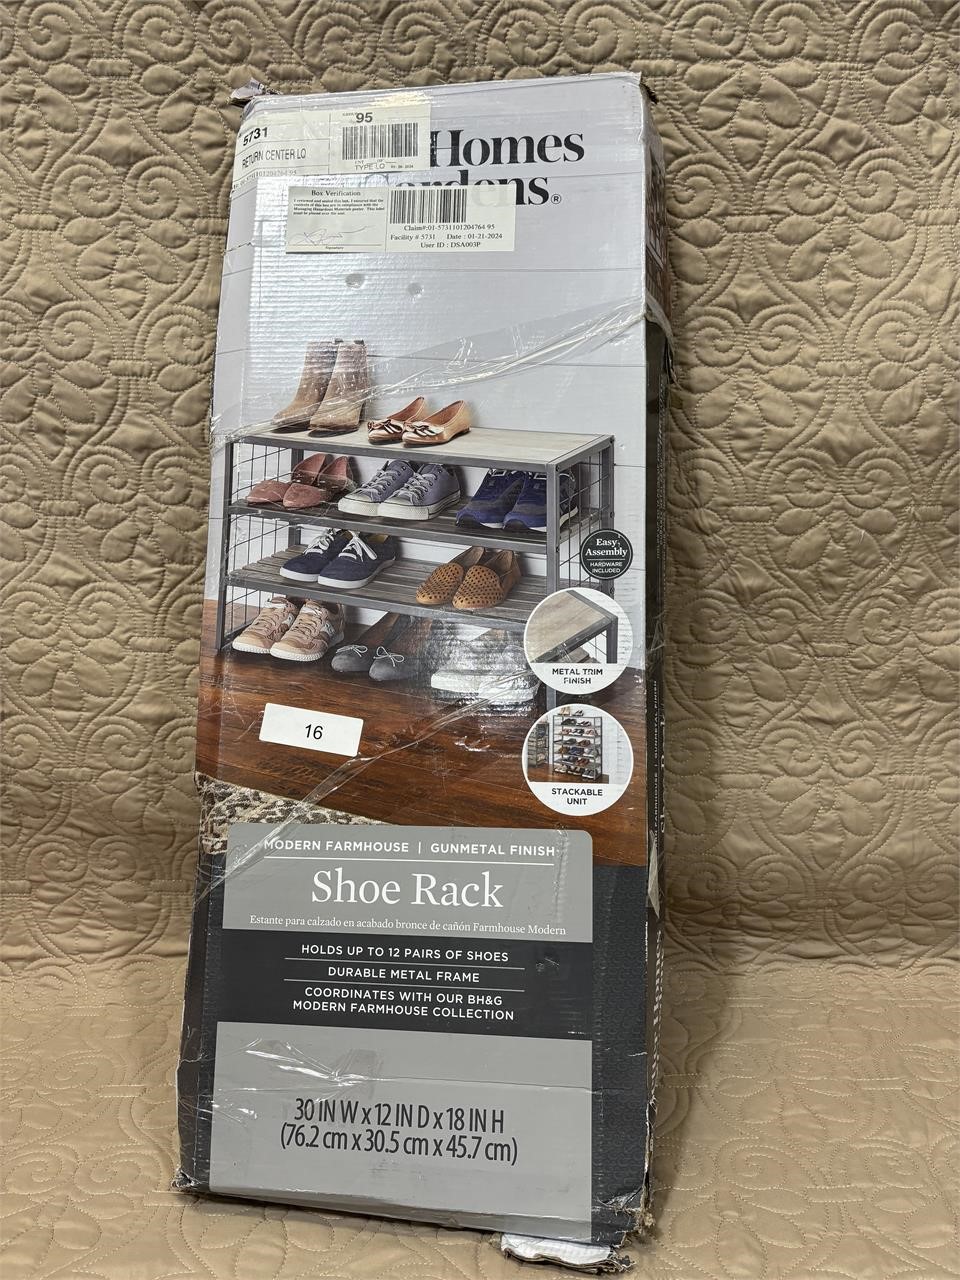 Better homes and gardens shoe rack